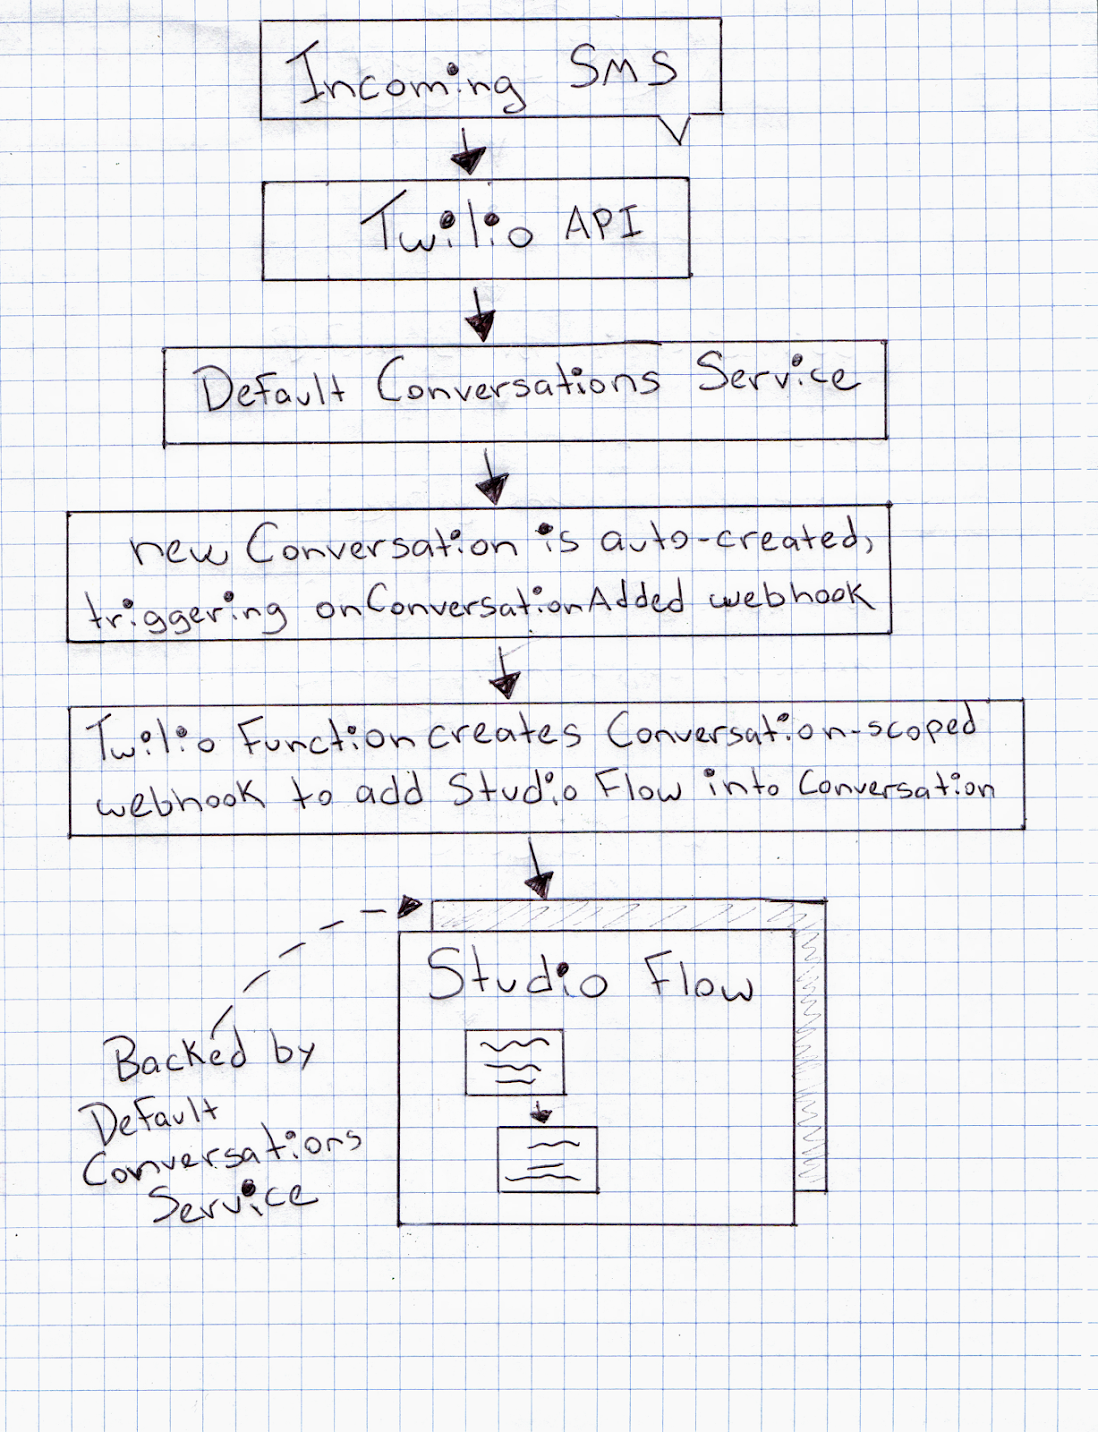 a diagram of how Twilio Studio integrates with Twilio Conversations. The flow goes "Incoming SMS" to Twilio API to Default Conversations Service to "new conversation is auto-created, triggering onConversationAdded webhook" to "Twilio Function creates Conversation-scoped webhook to add Studio Flow in to Conversation" to "Studio Flow, backed by Default Conversations Service."